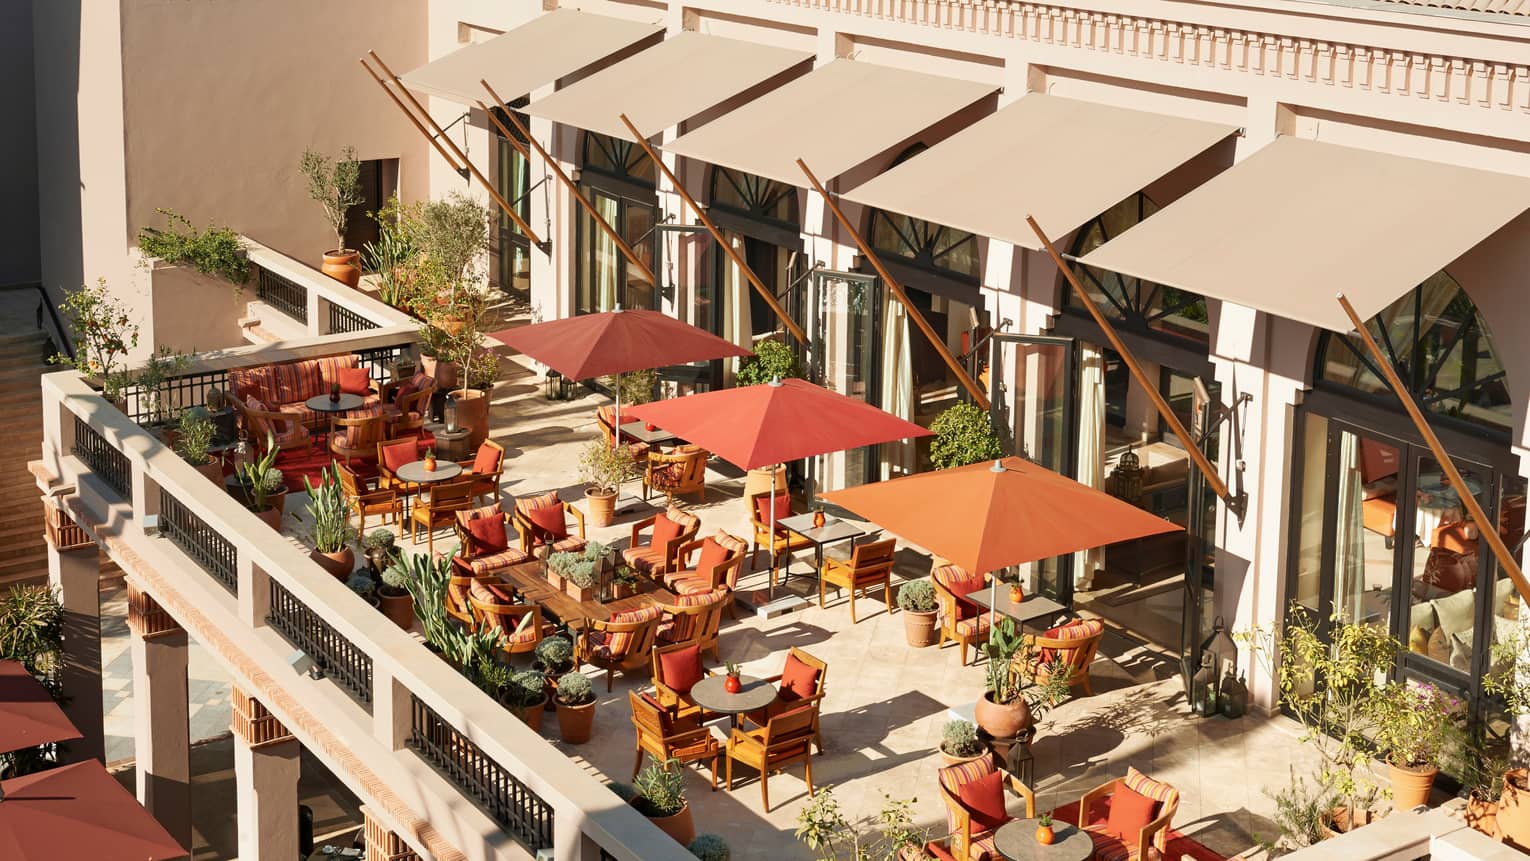 Aerial view of sunny patio with dining tables, chairs, orange umbrellas